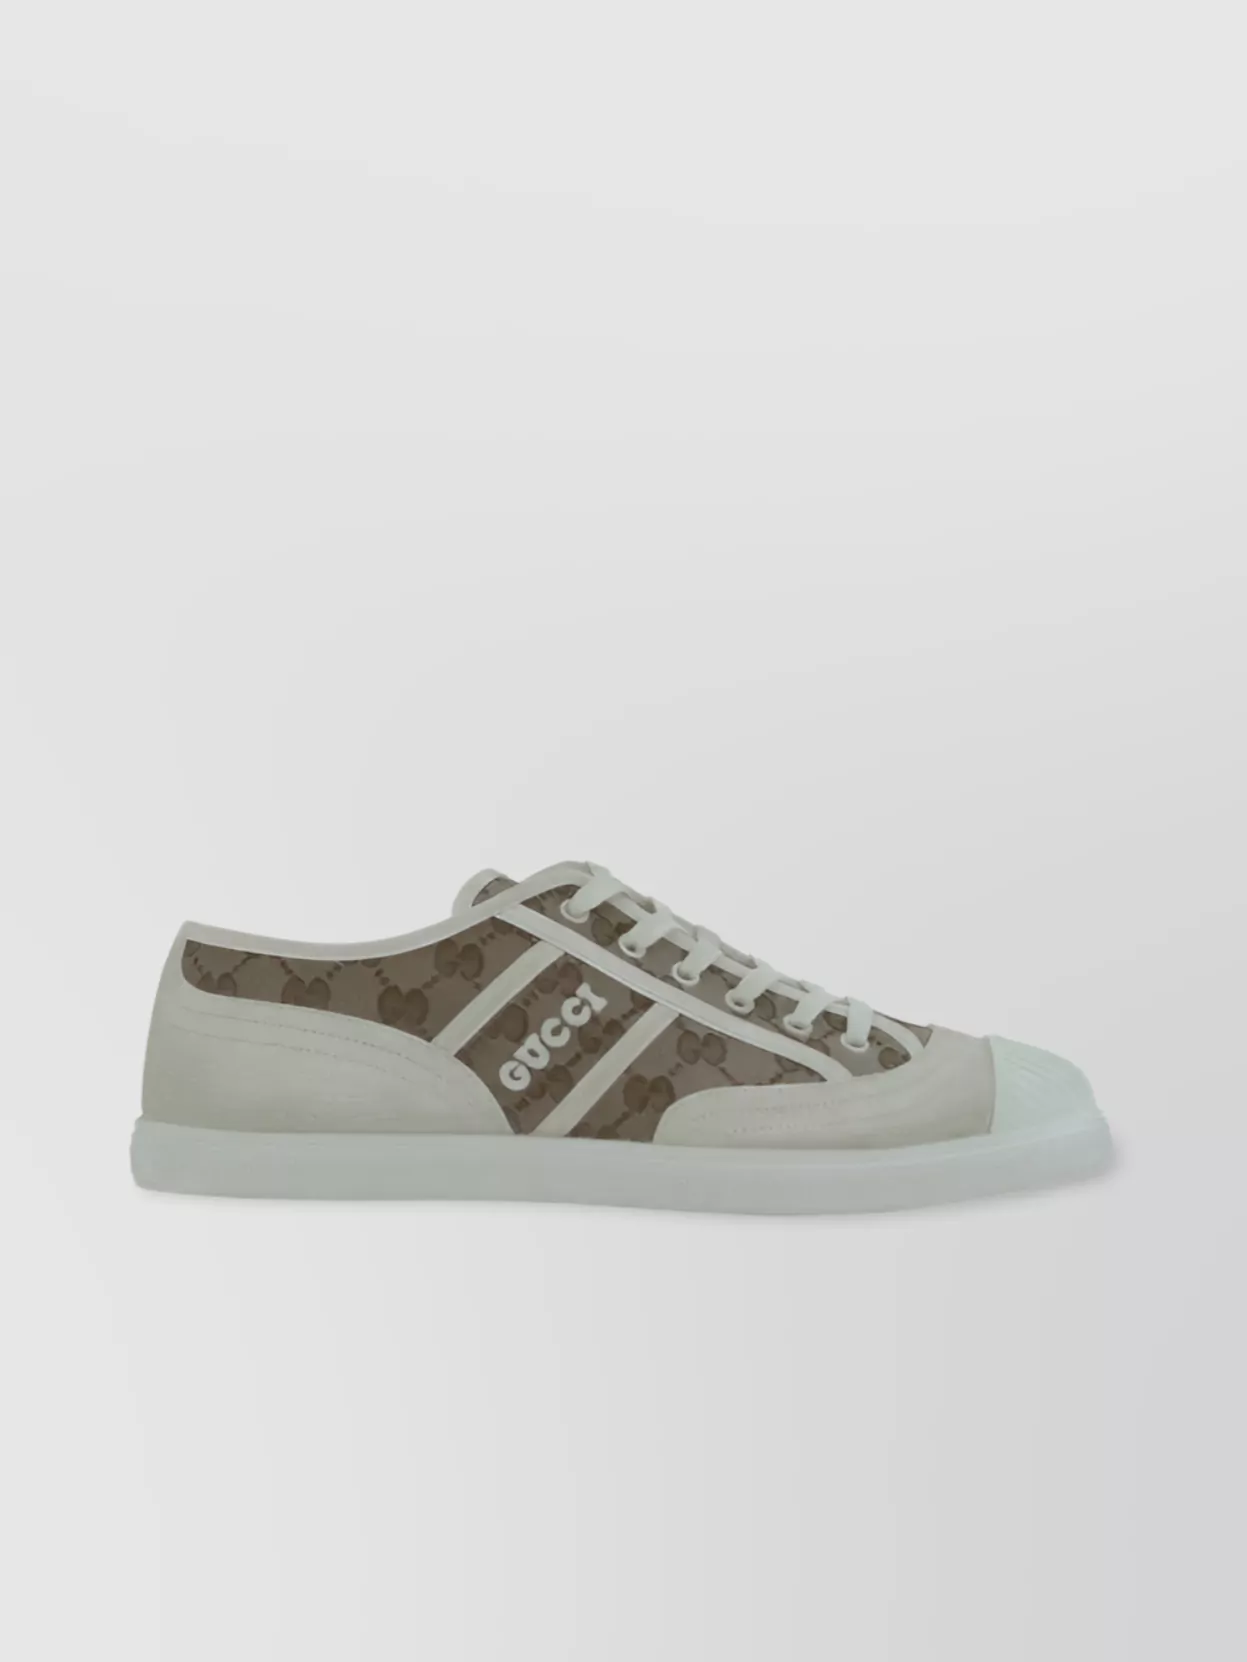 Gucci Low-top Canvas Sneakers Embroidered Panel In Gray